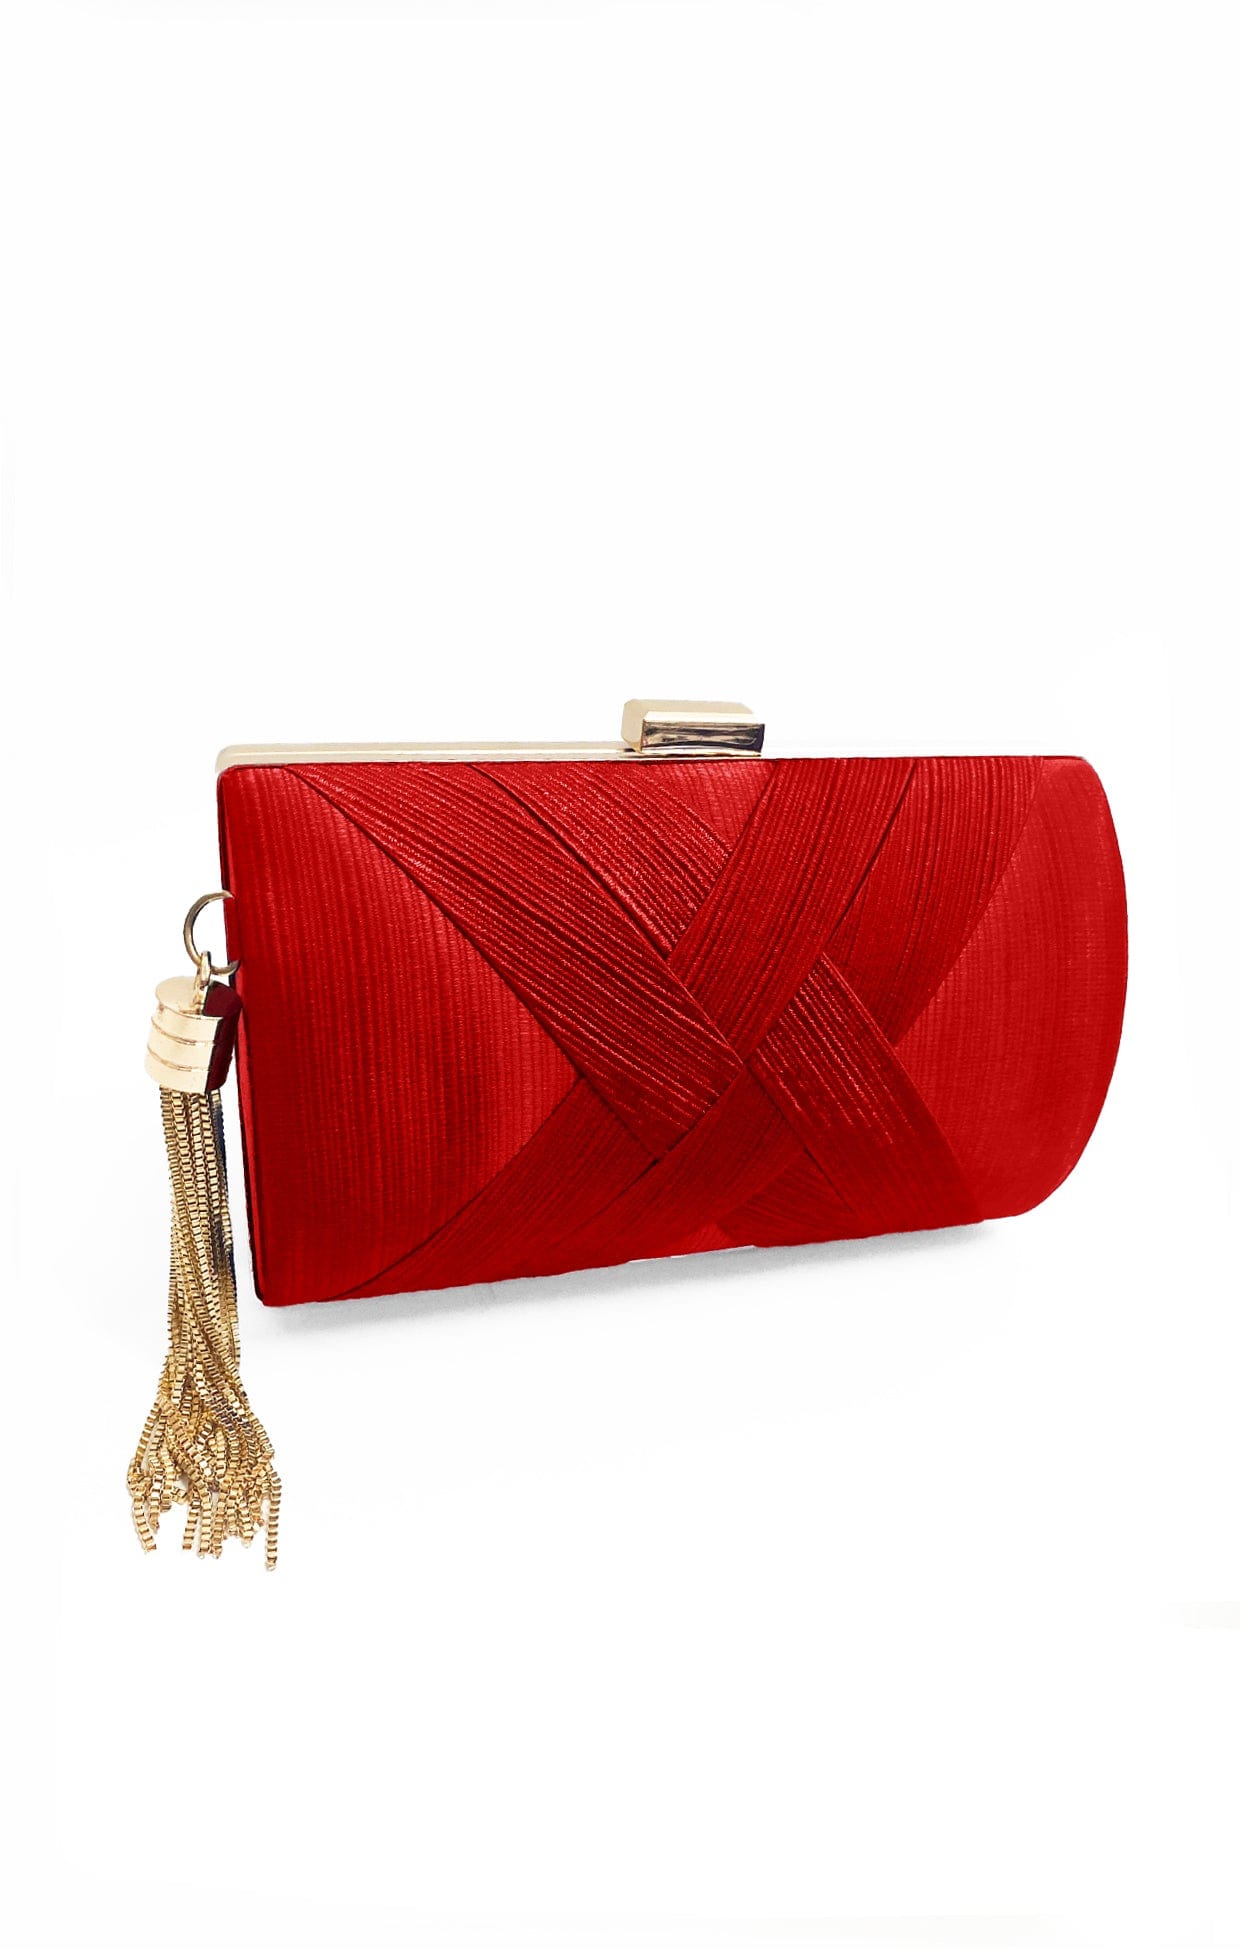 ACCESSORIES Bags Clutches One Size / Red DEANNA EVENING BAG IN RUBY